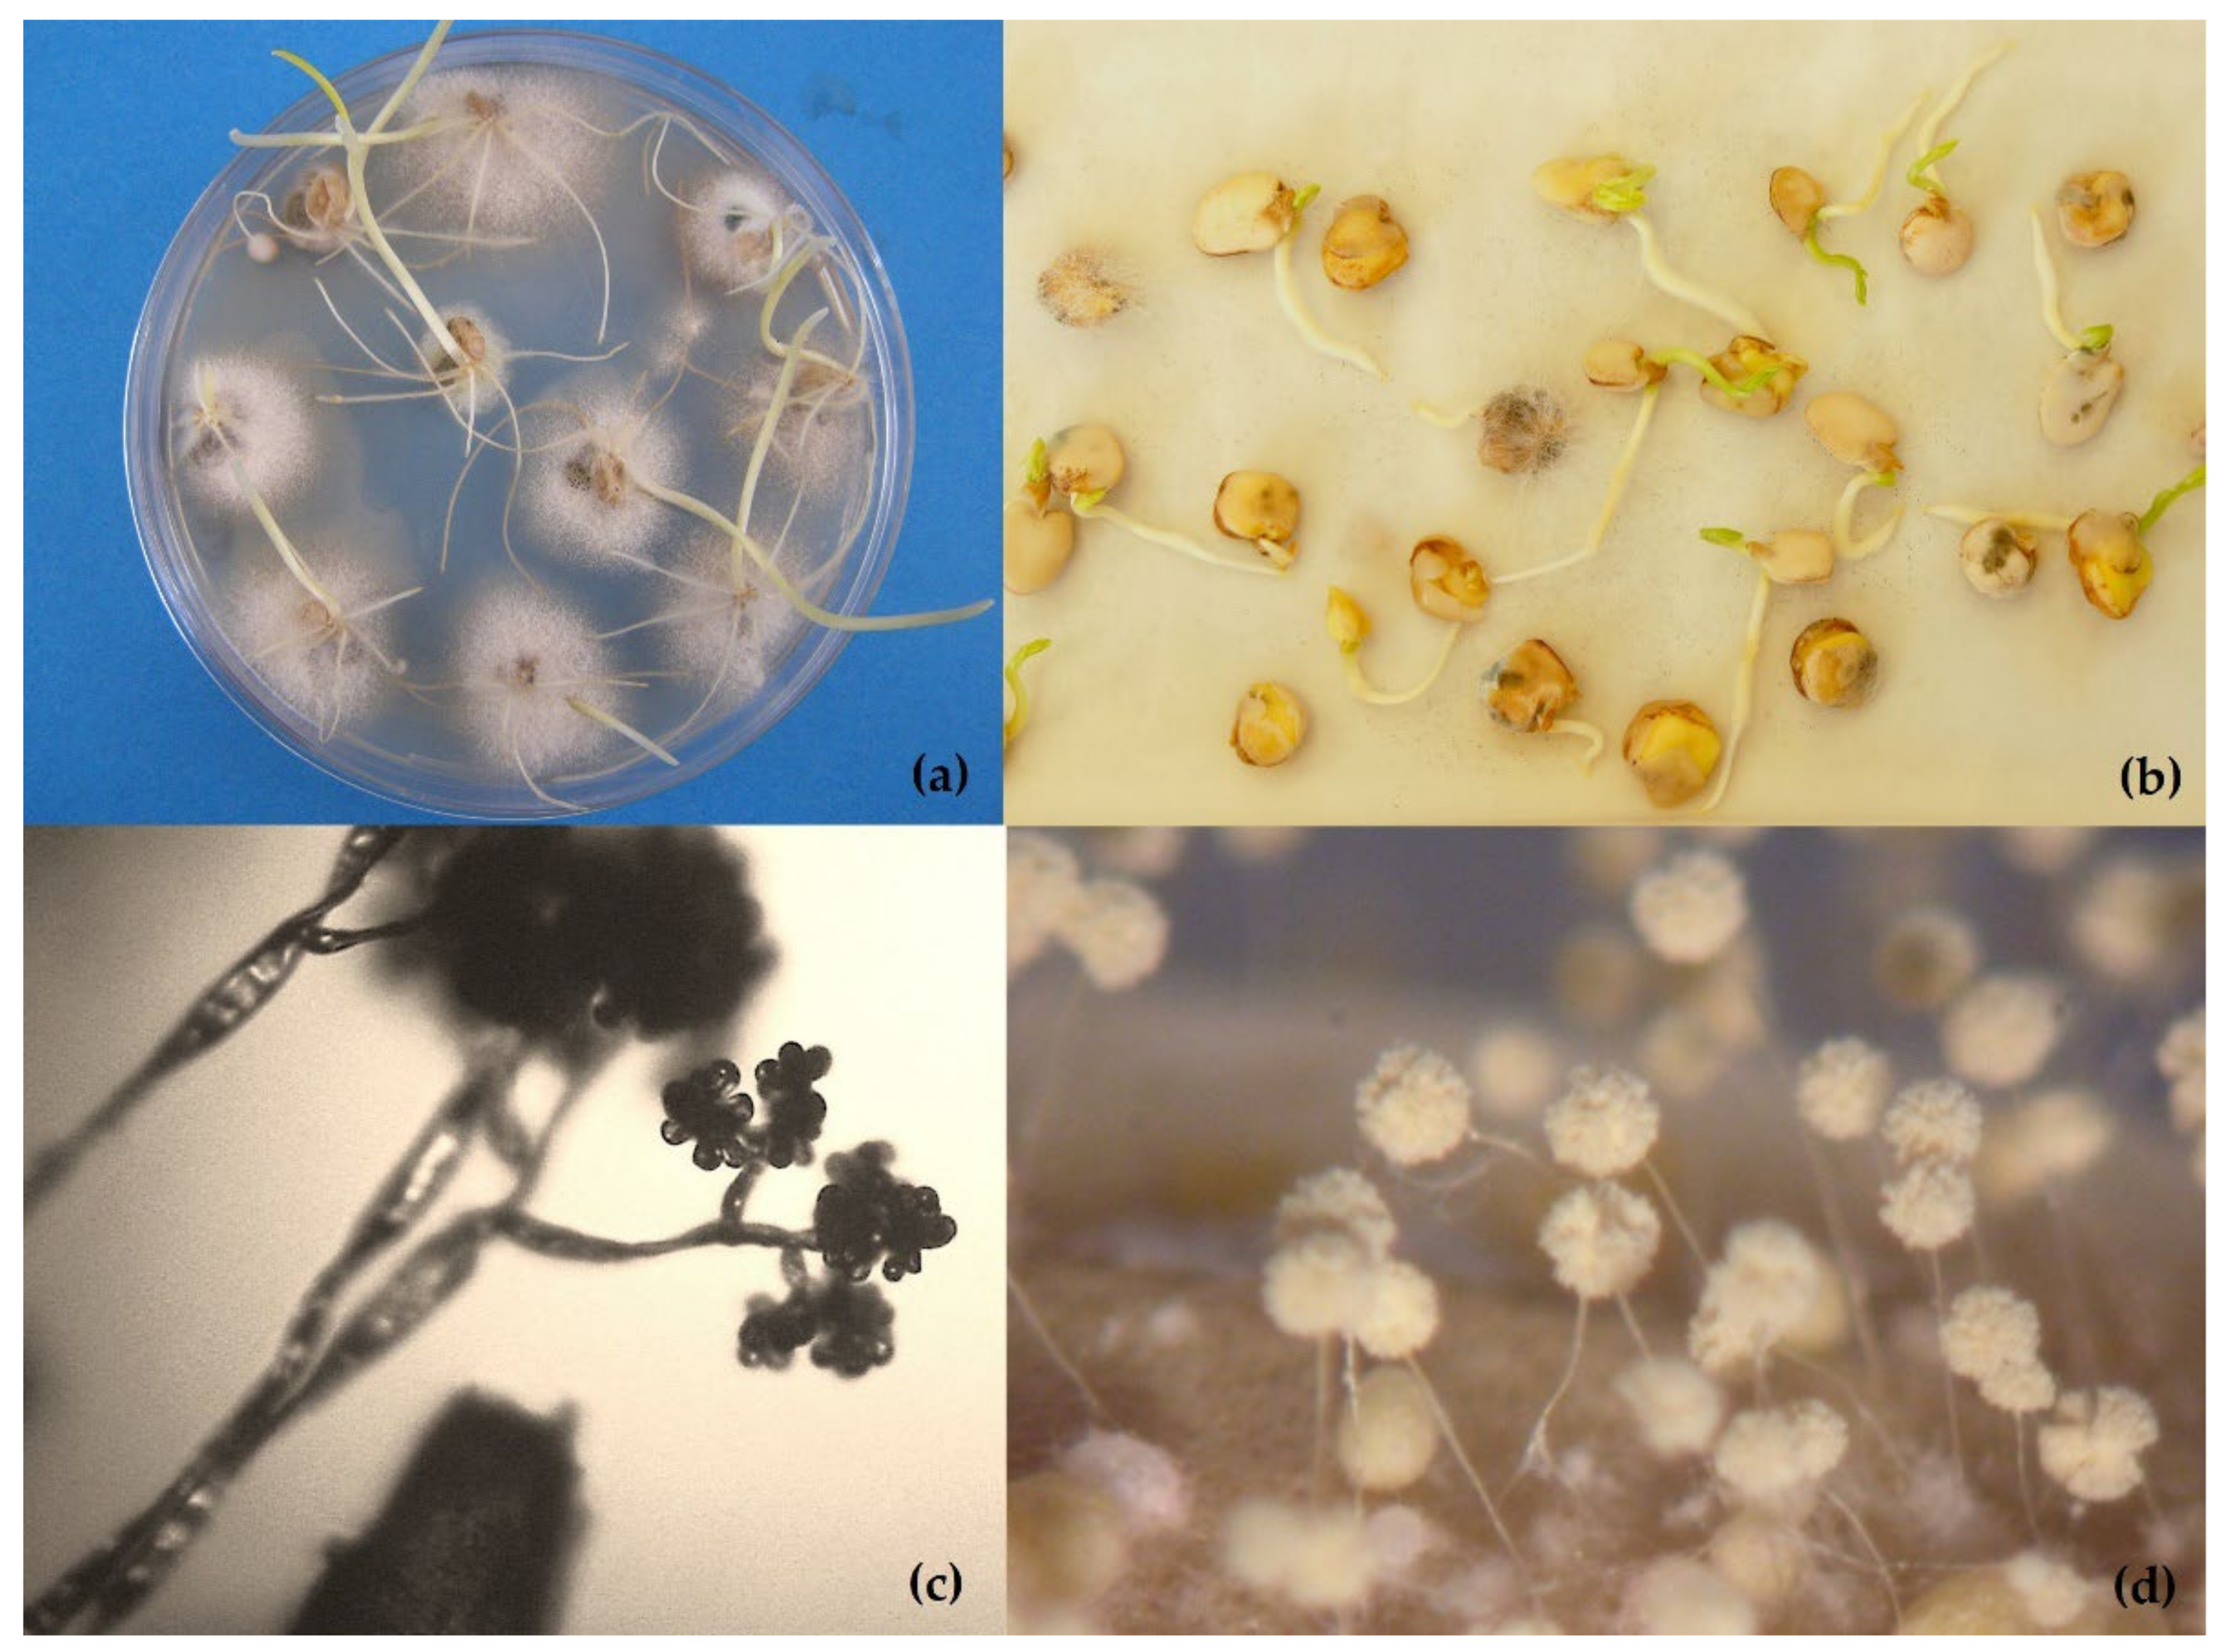 Plants | Free Full-Text | Fungal Pathogens and Seed Storage in the Dry State